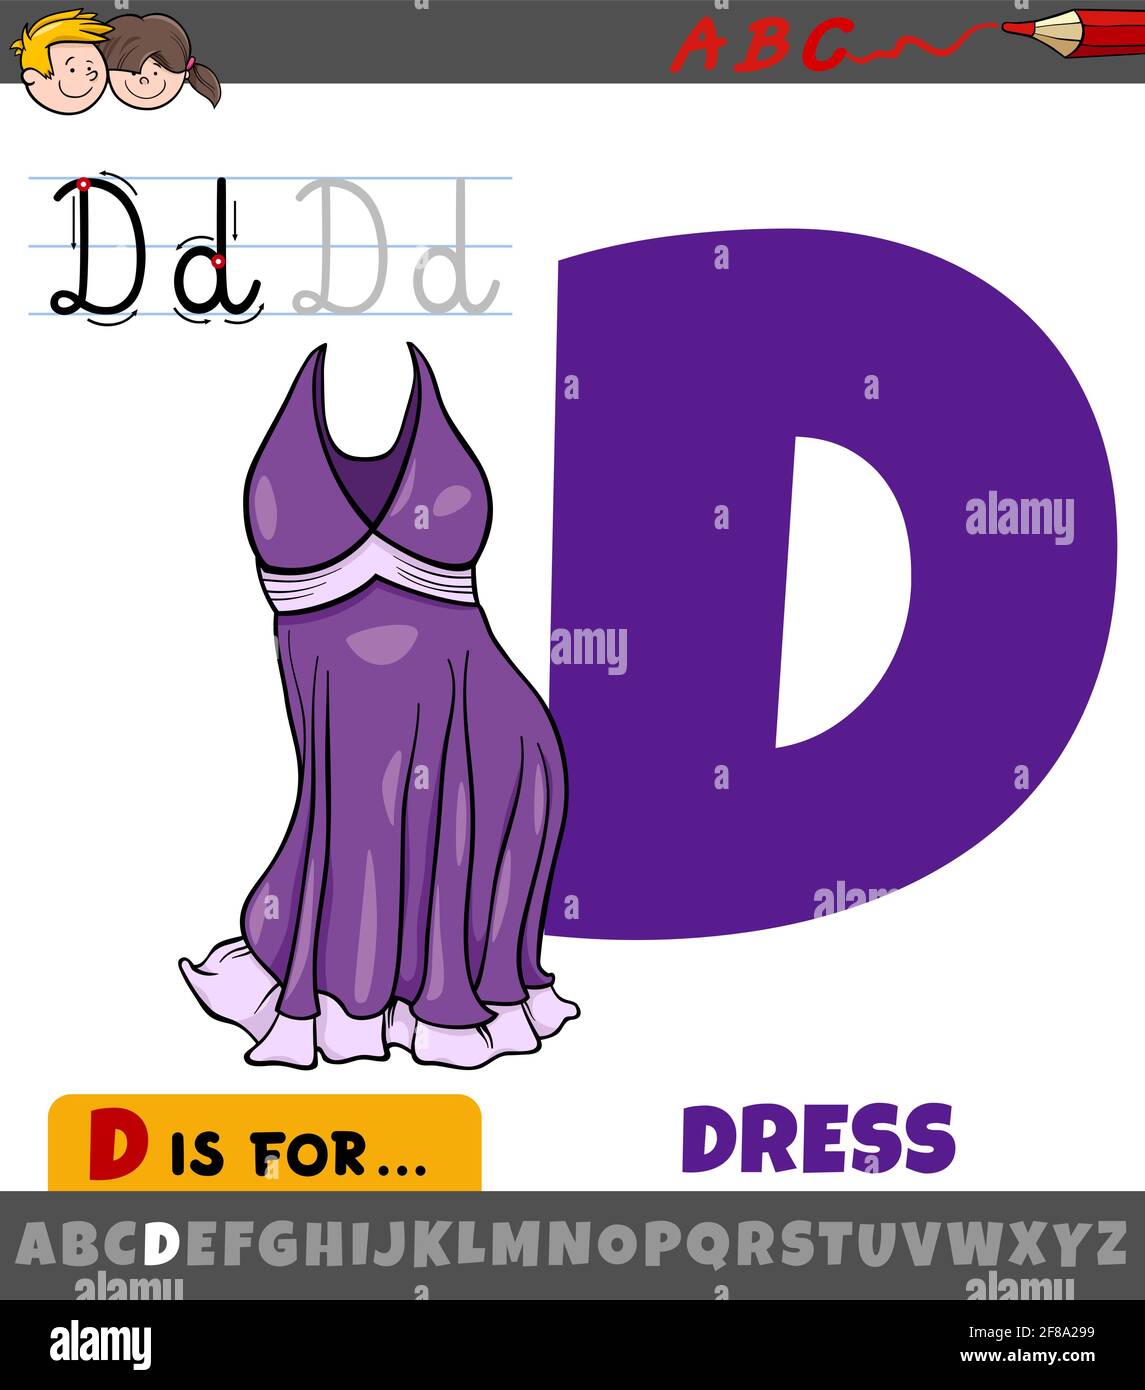 Educational cartoon illustration of letter D from alphabet with dress object Stock Vector